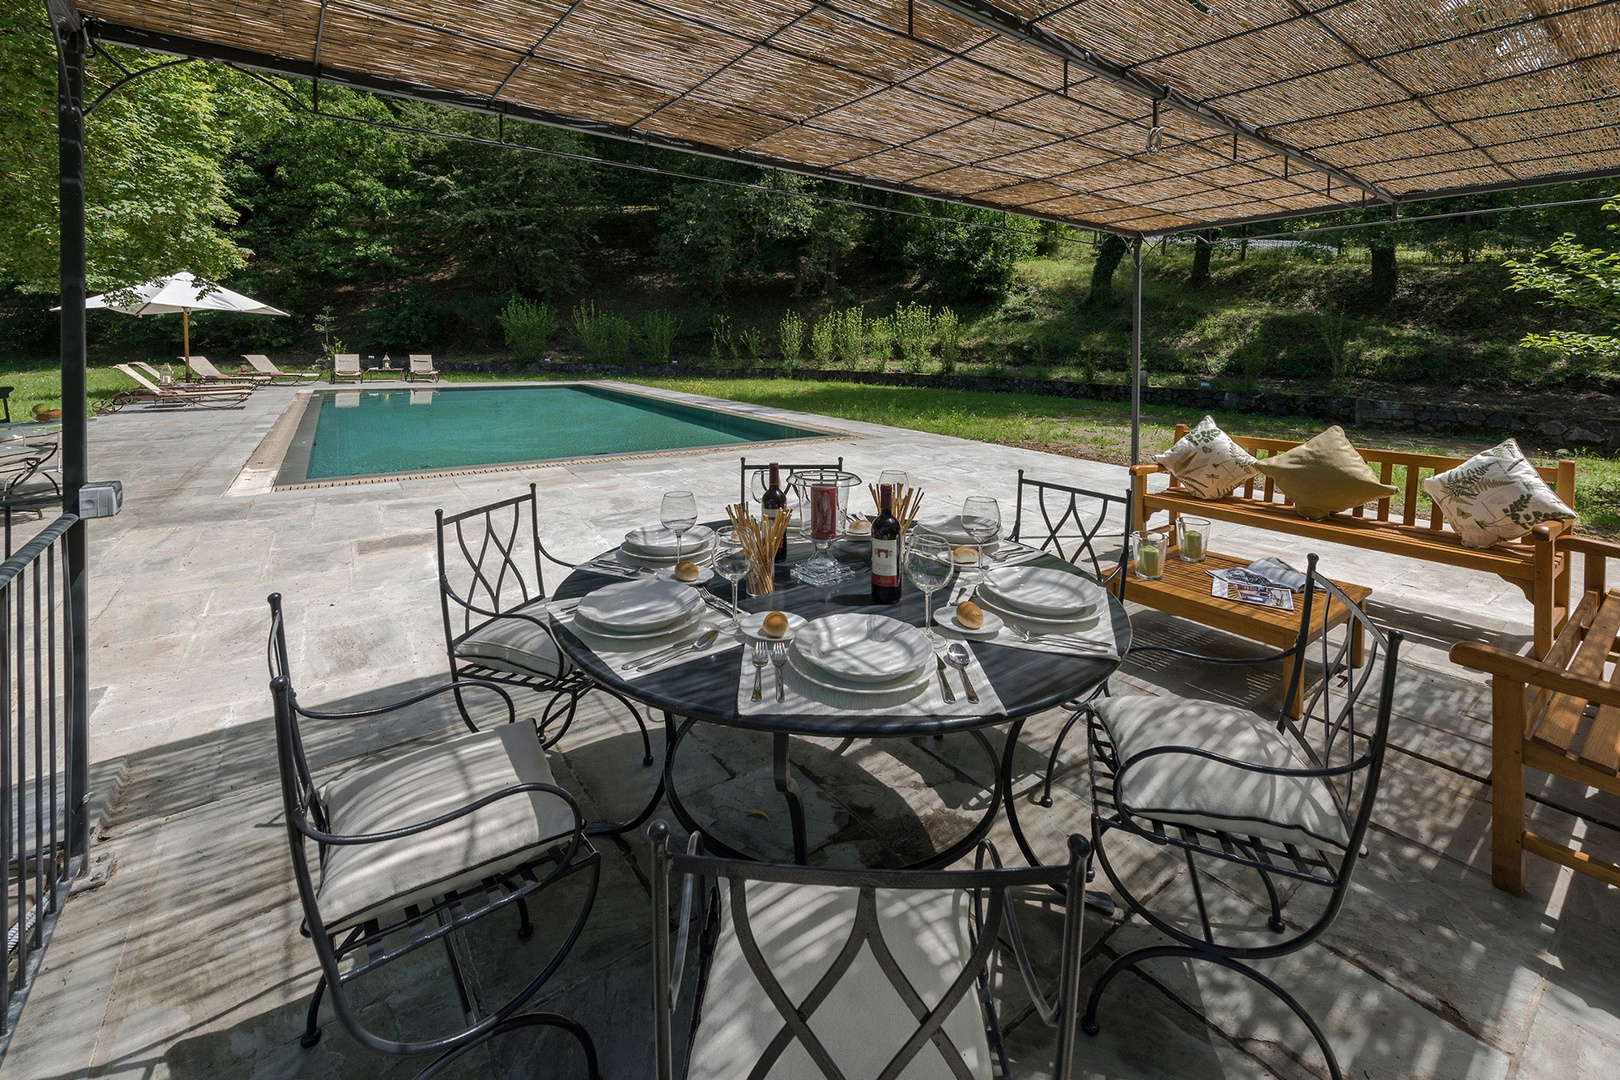 Enjoy a poolside lunch on a warm summers day.